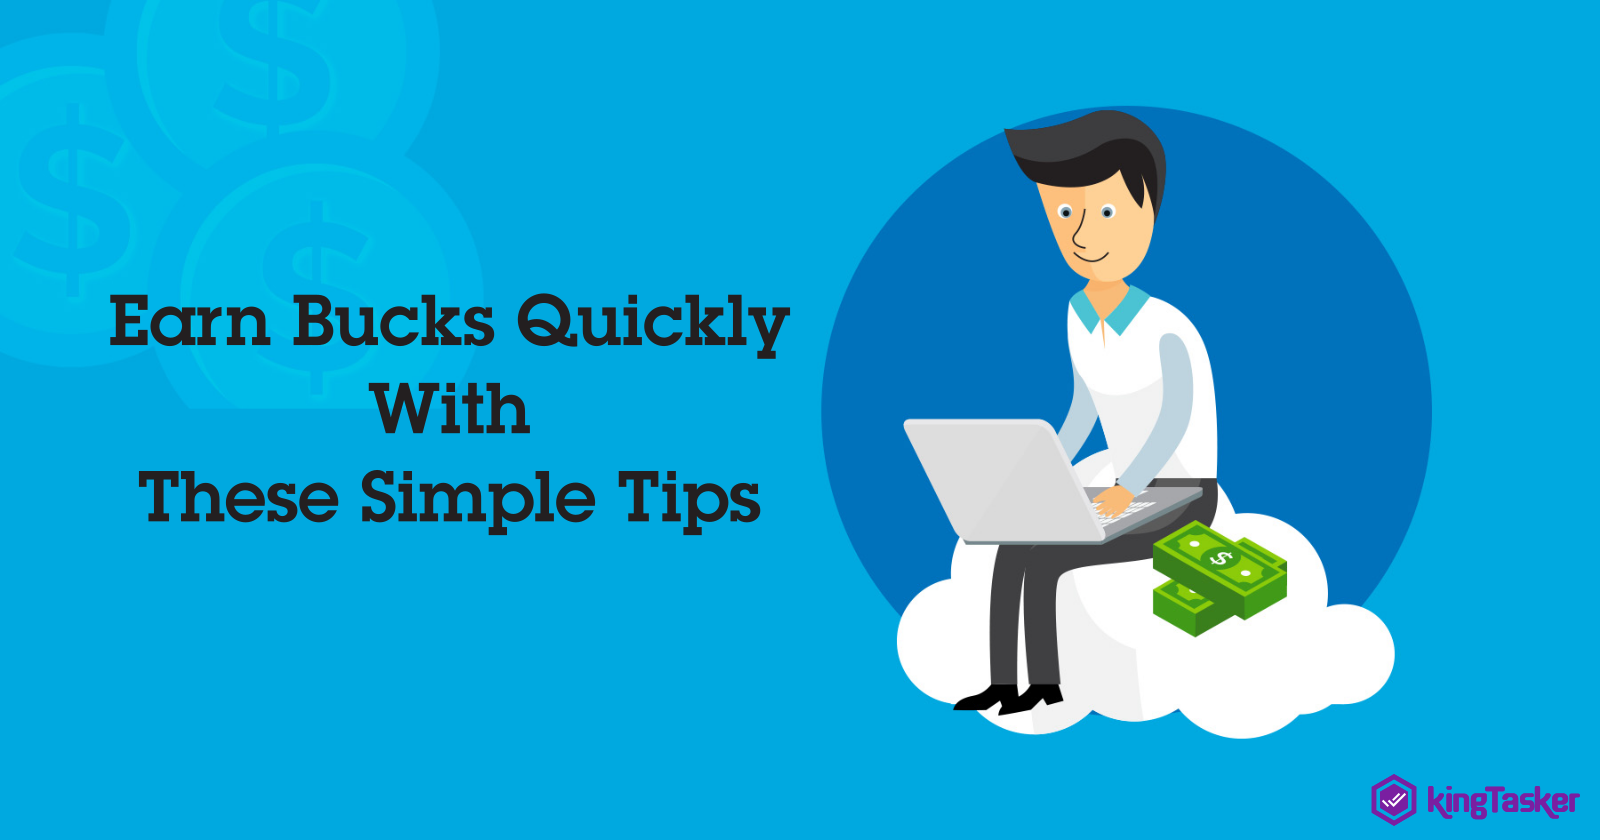 Earn Bucks Quickly With These Simple Tips